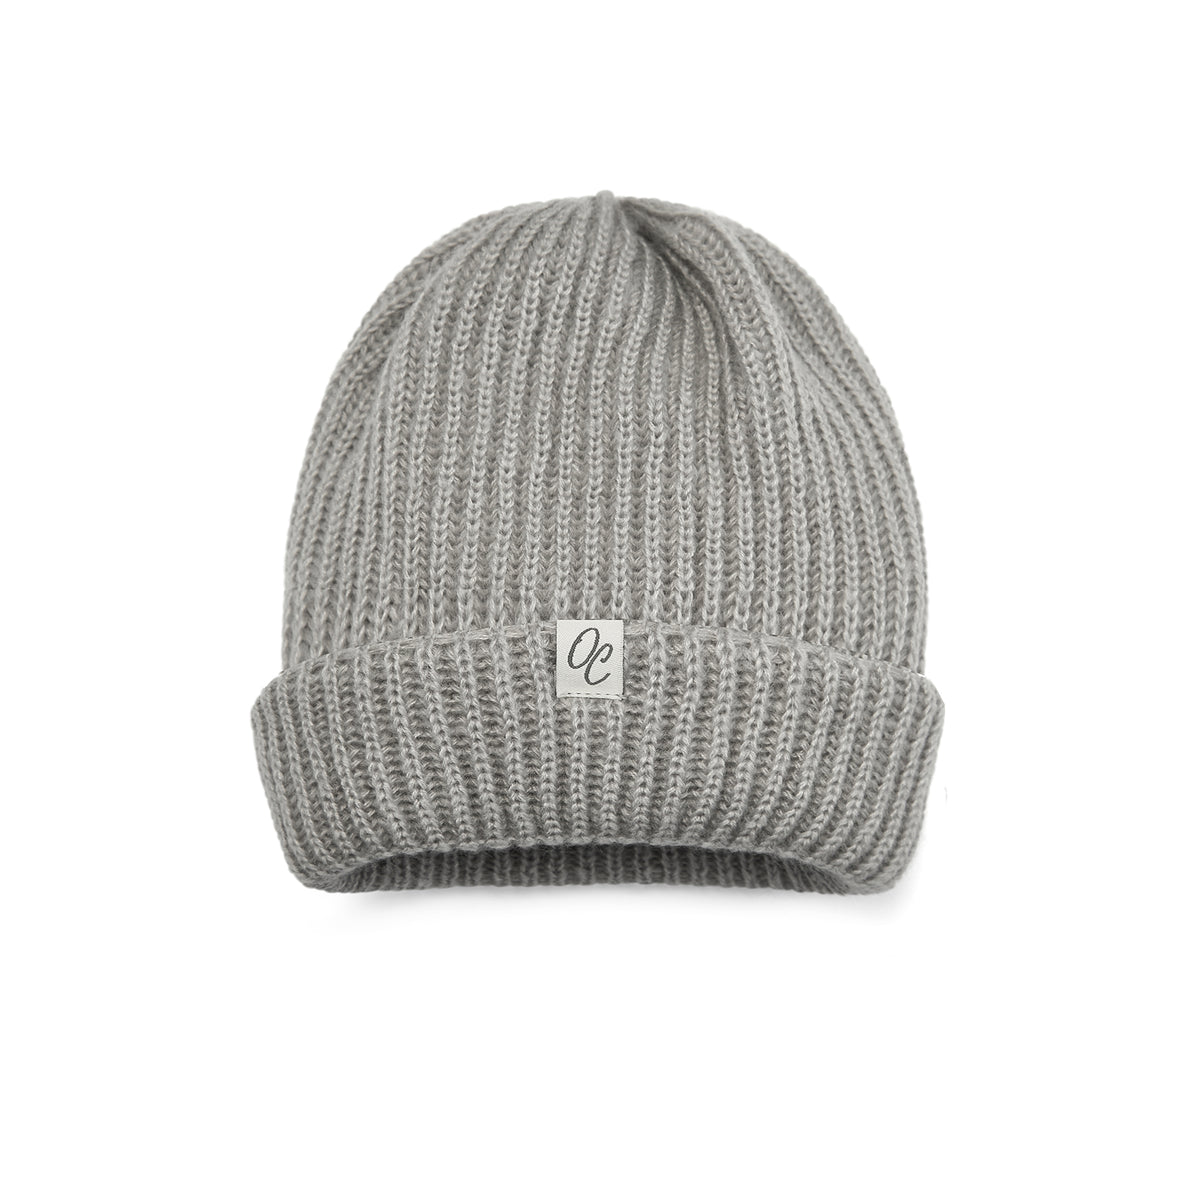 Only Curls Satin Lined Knitted Grey Beanie Hat